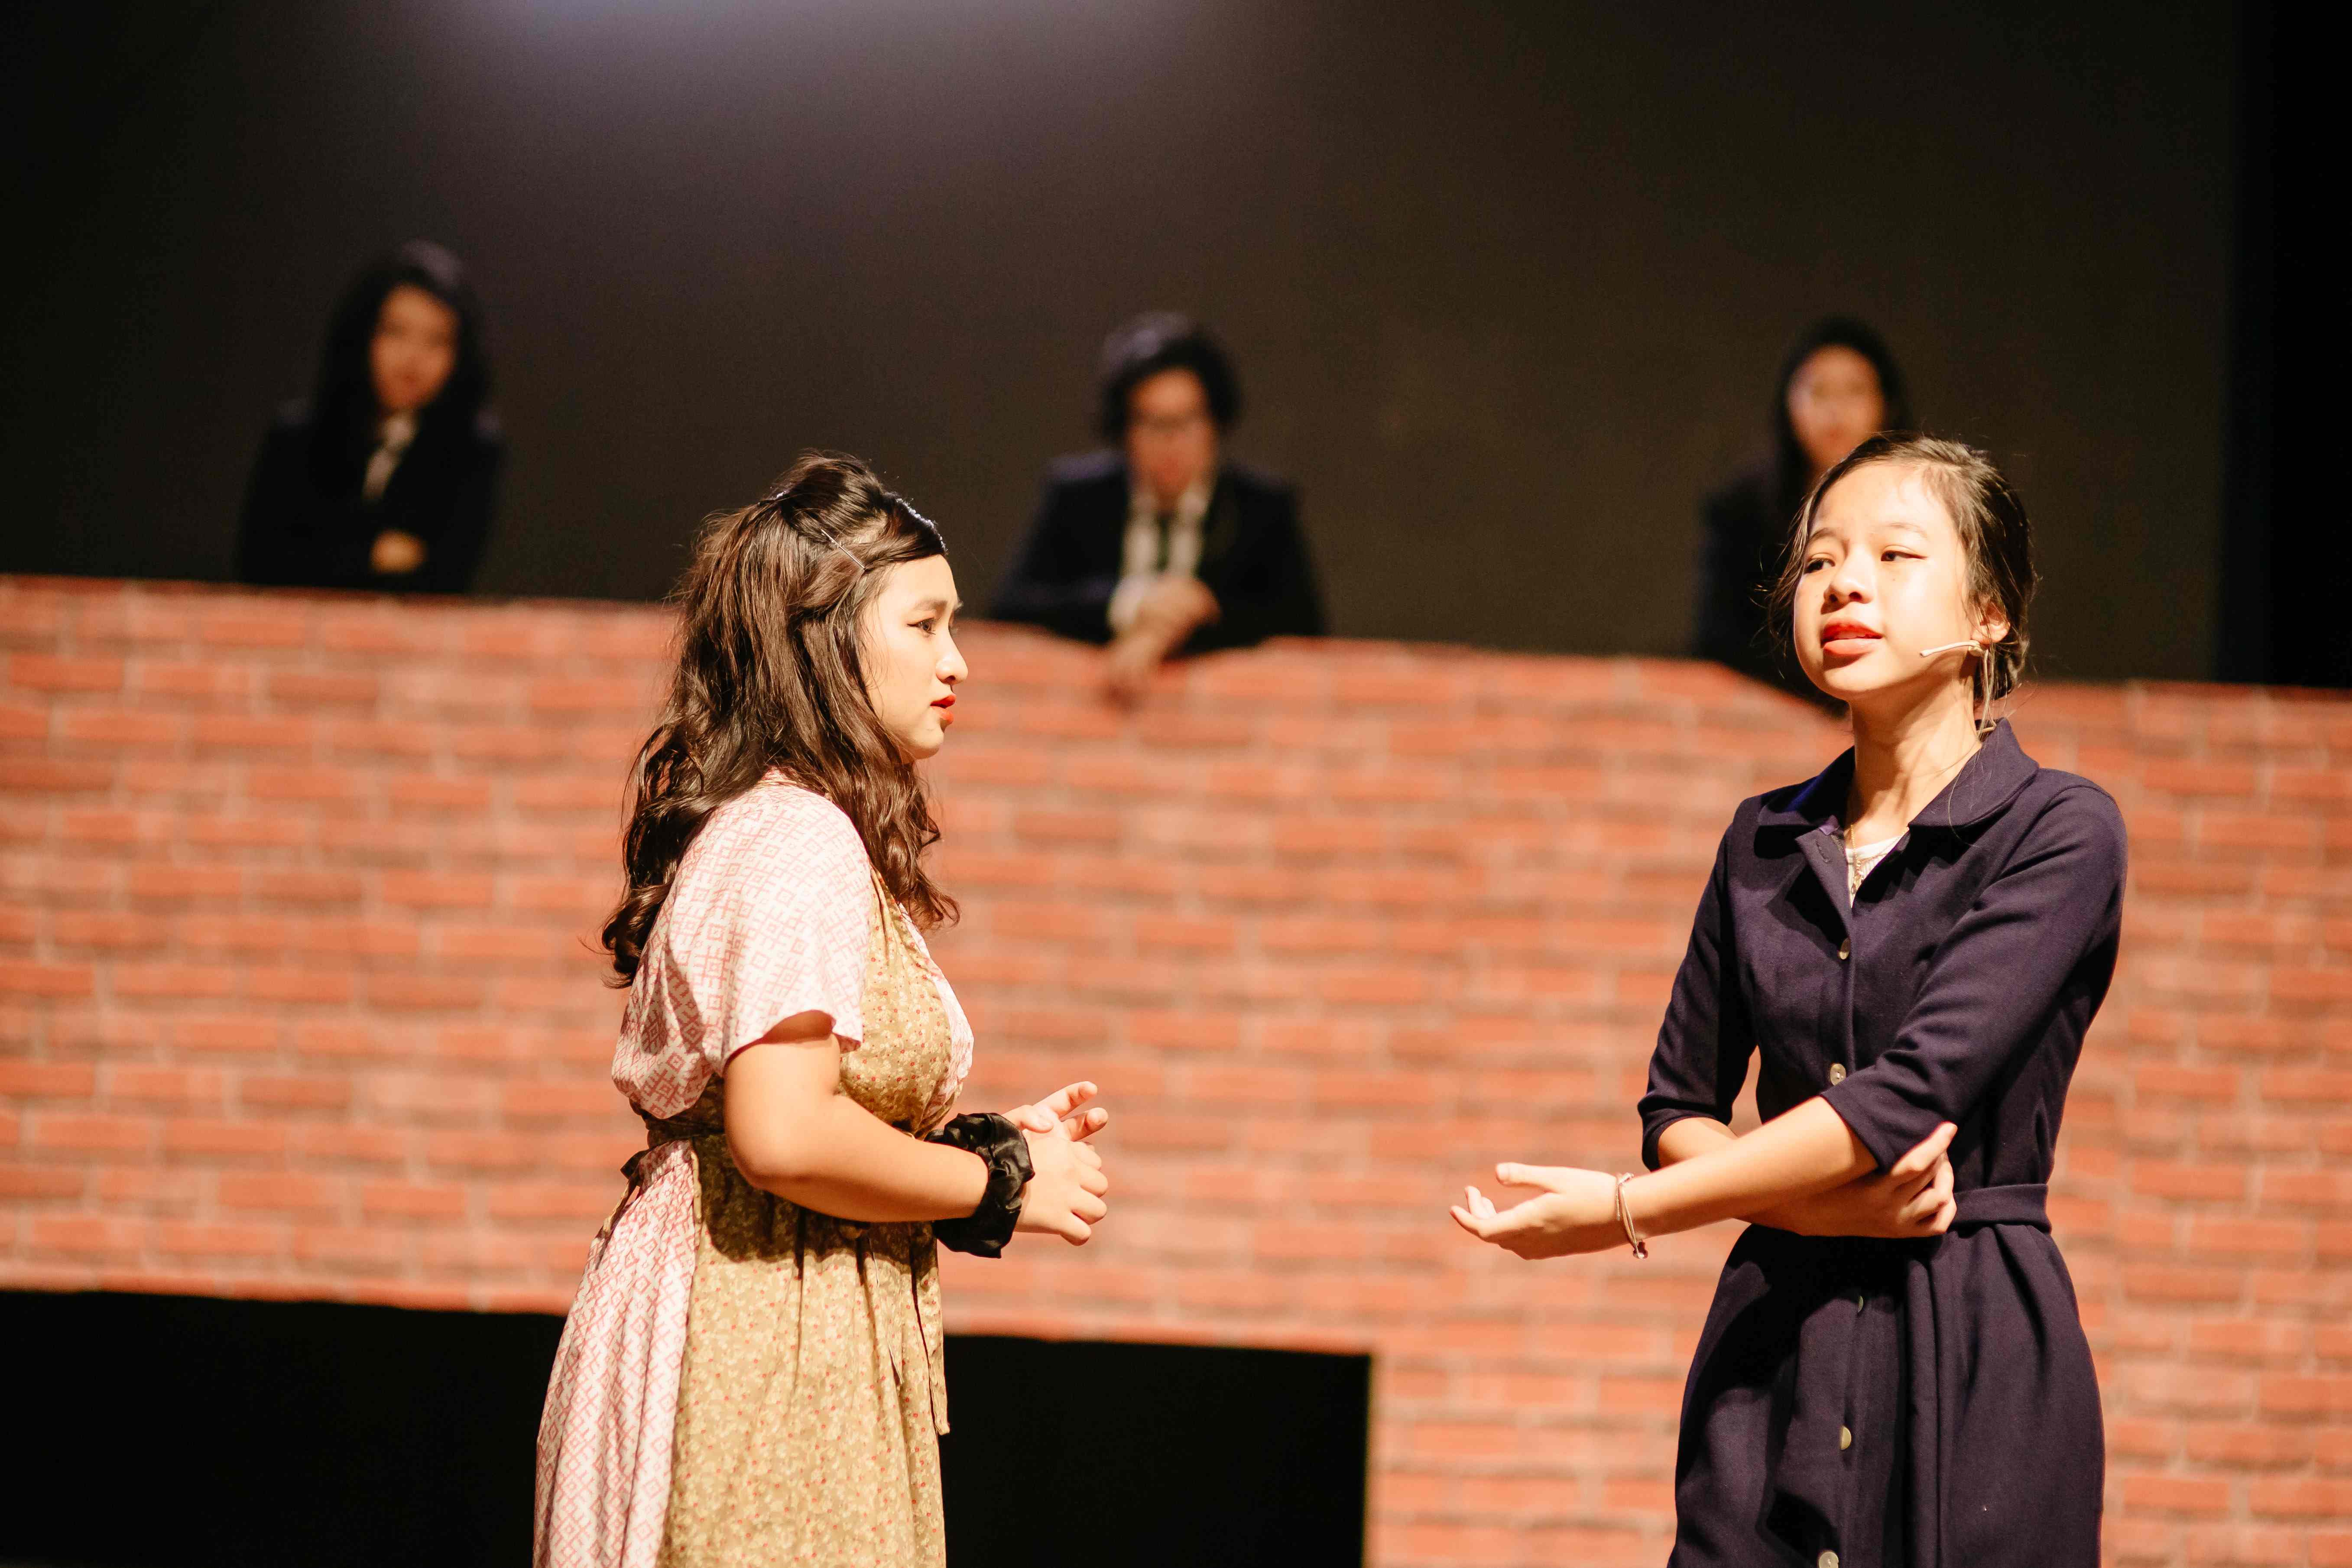 Mai Phuong Anh, Year 9: “Confidence and adaptability ignited by an acting opportunity on a large stage” - Mai Phuong Anh Year 9 Confidence and adaptability ignited by an acting opportunity on a large stage